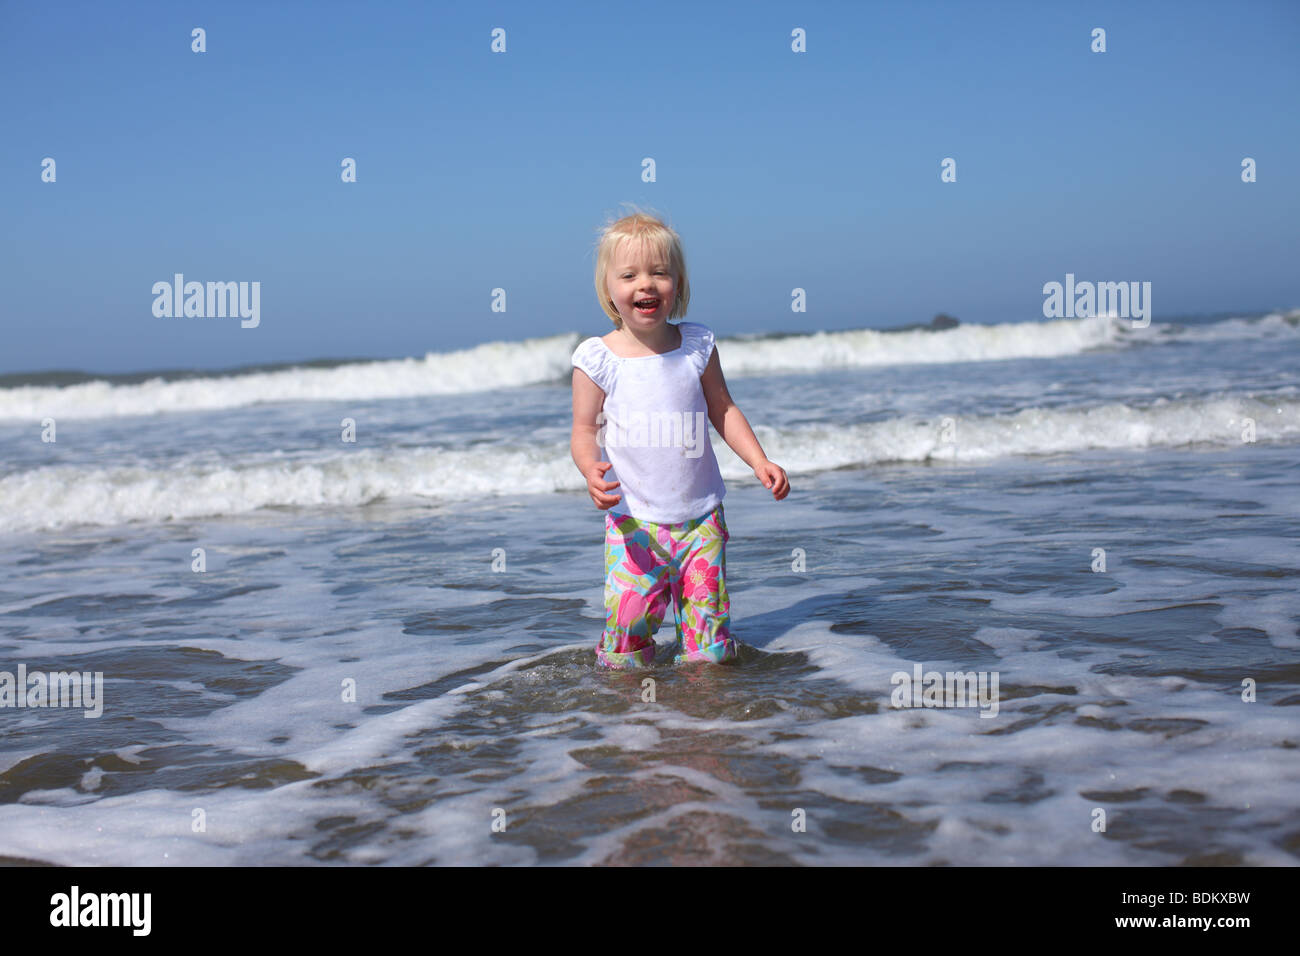 Young girl in water at beach Stock Photo